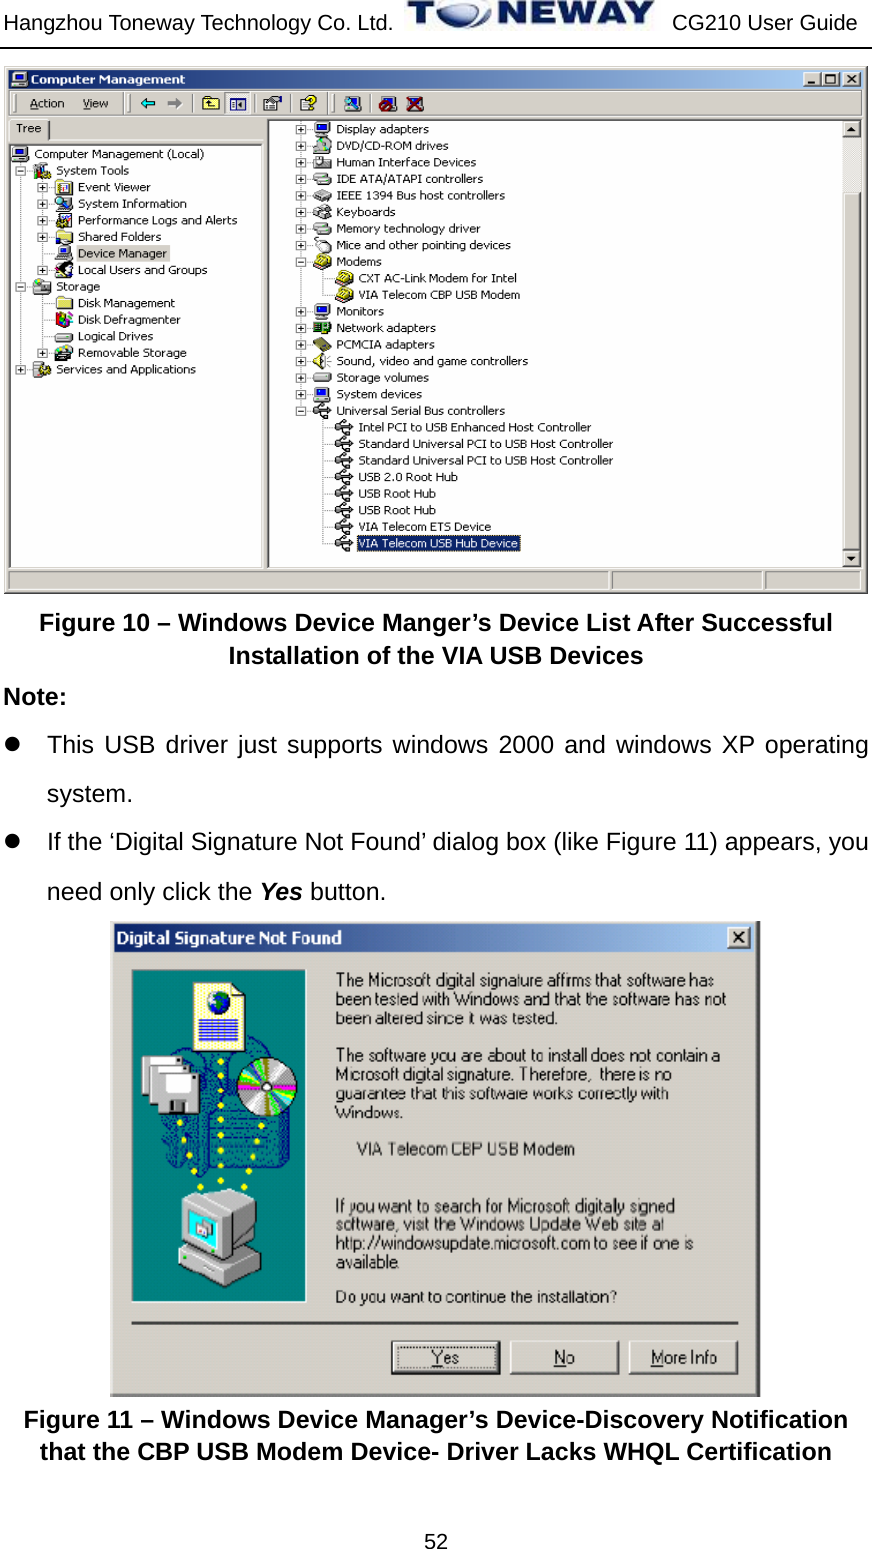 Hangzhou Toneway Technology Co. Ltd.    CG210 User Guide 52  Figure 10 – Windows Device Manger’s Device List After Successful Installation of the VIA USB Devices Note:  z  This USB driver just supports windows 2000 and windows XP operating system. z  If the ‘Digital Signature Not Found’ dialog box (like Figure 11) appears, you need only click the Yes button.  Figure 11 – Windows Device Manager’s Device-Discovery Notification that the CBP USB Modem Device- Driver Lacks WHQL Certification 